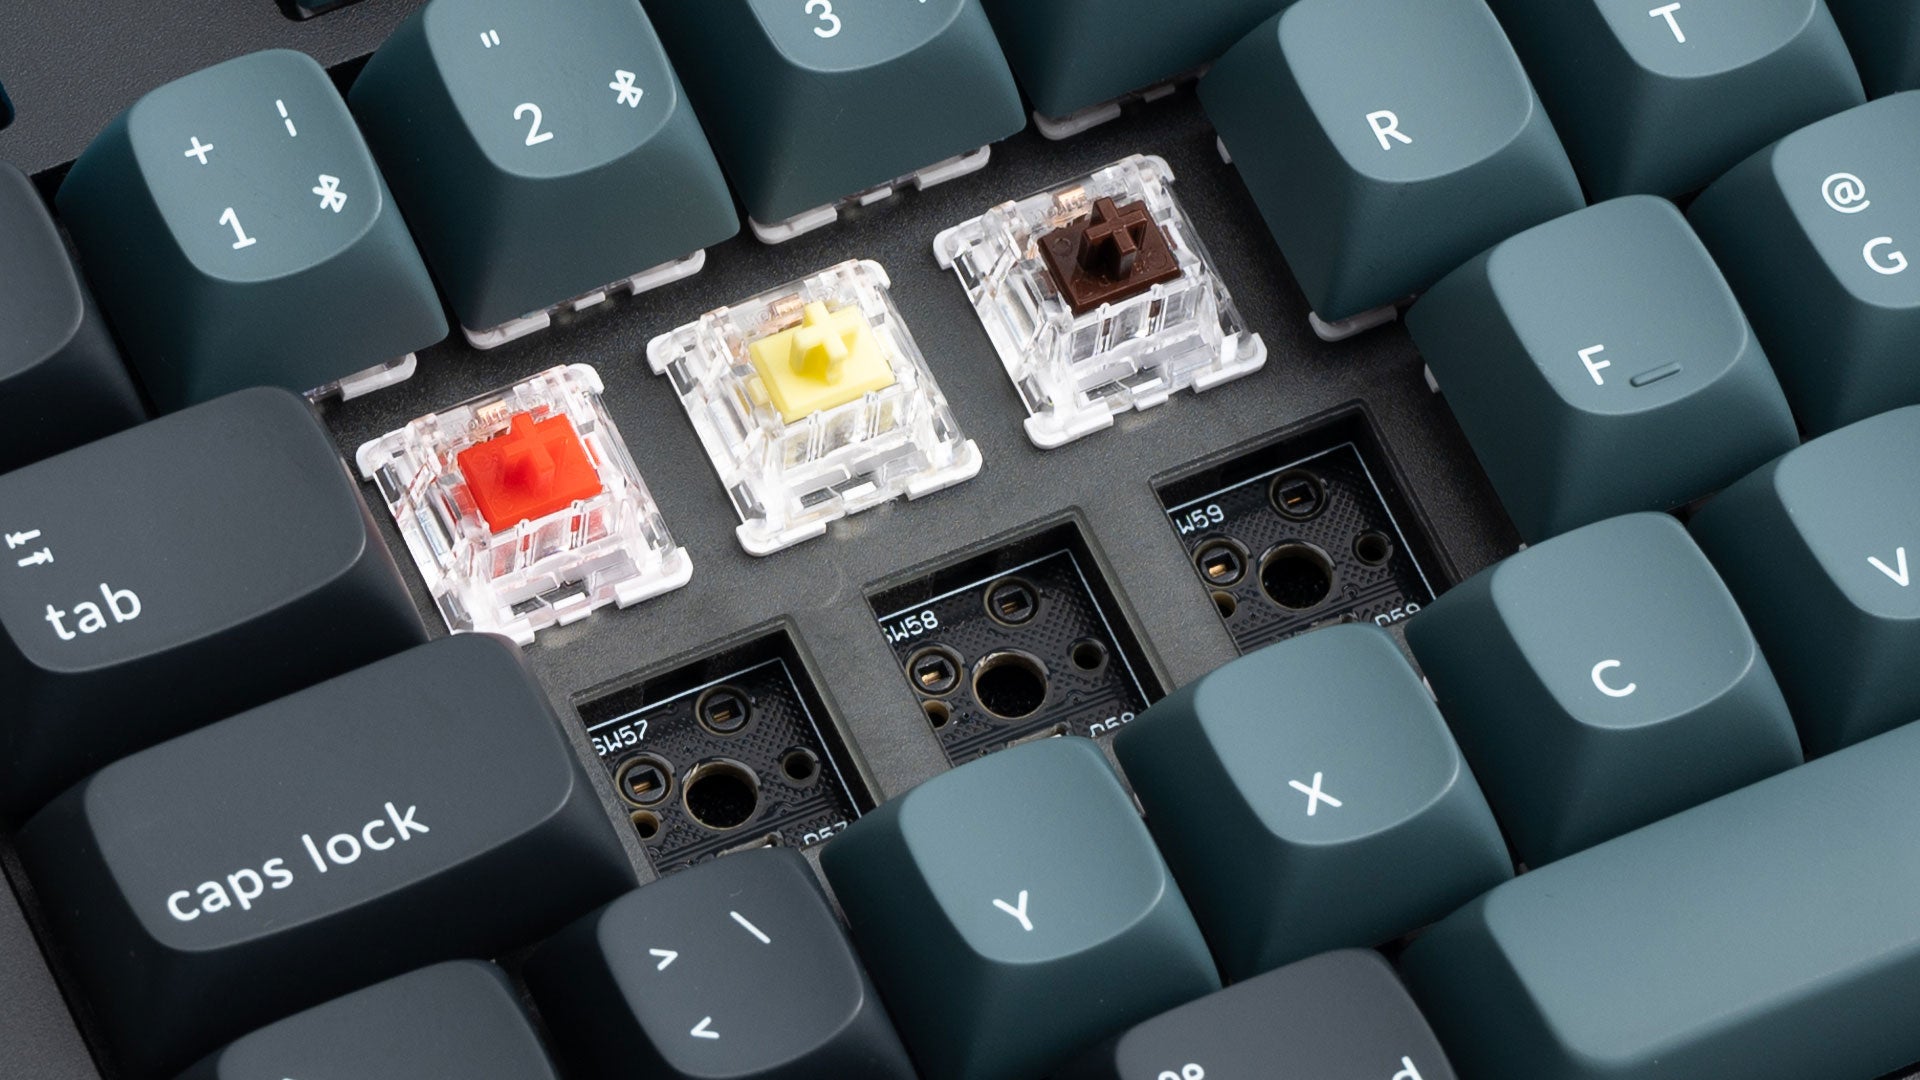 Hot-swappable feature Keychron Q5 Pro QMK/VIA 96% layout wireless custom mechanical keyboard ISO Layout